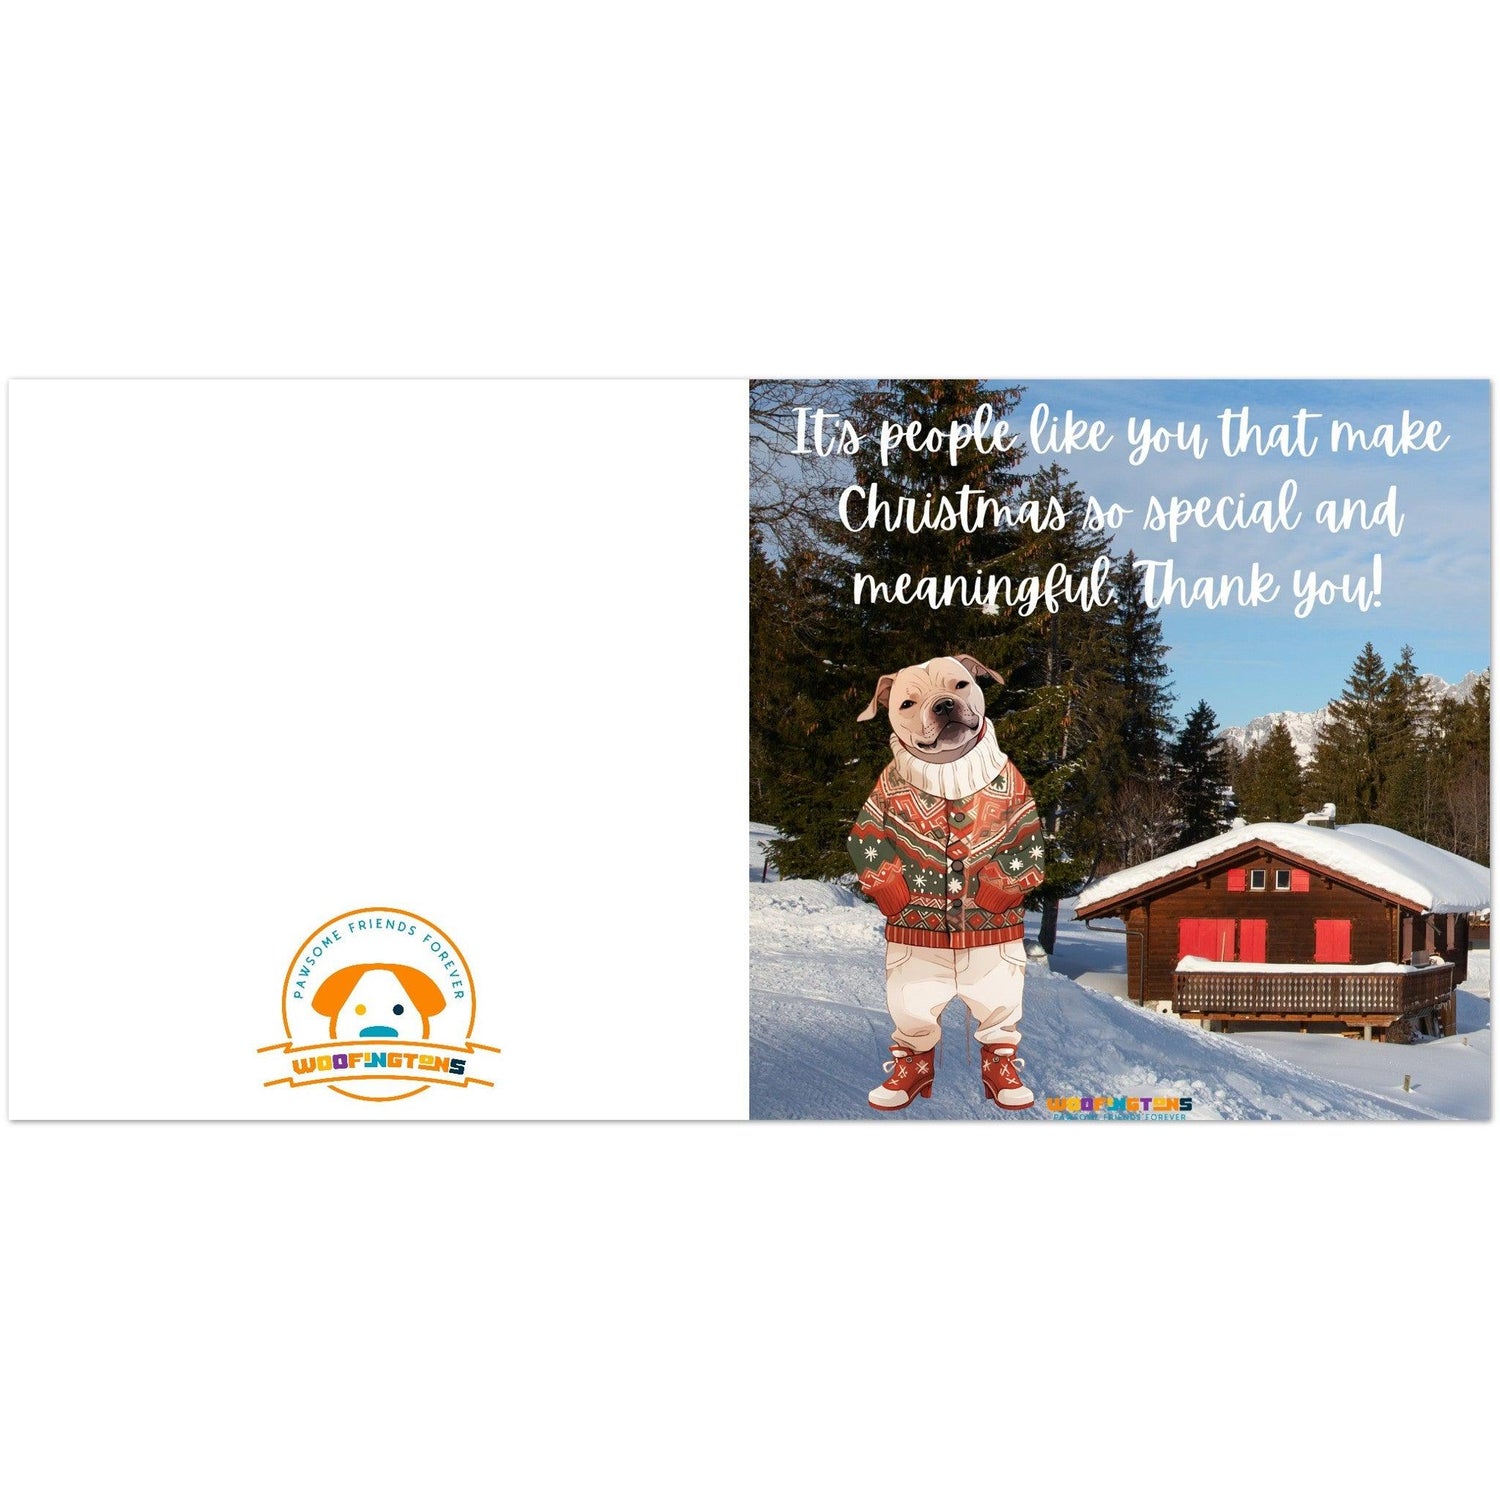 &quot;It’s people like you that make Christmas so special and meaningful. Thank you!&quot; - Whimsical Winter Dog Christmas Card - Pack of 10 Greeting Cards (premium envelopes) - Woofingtons